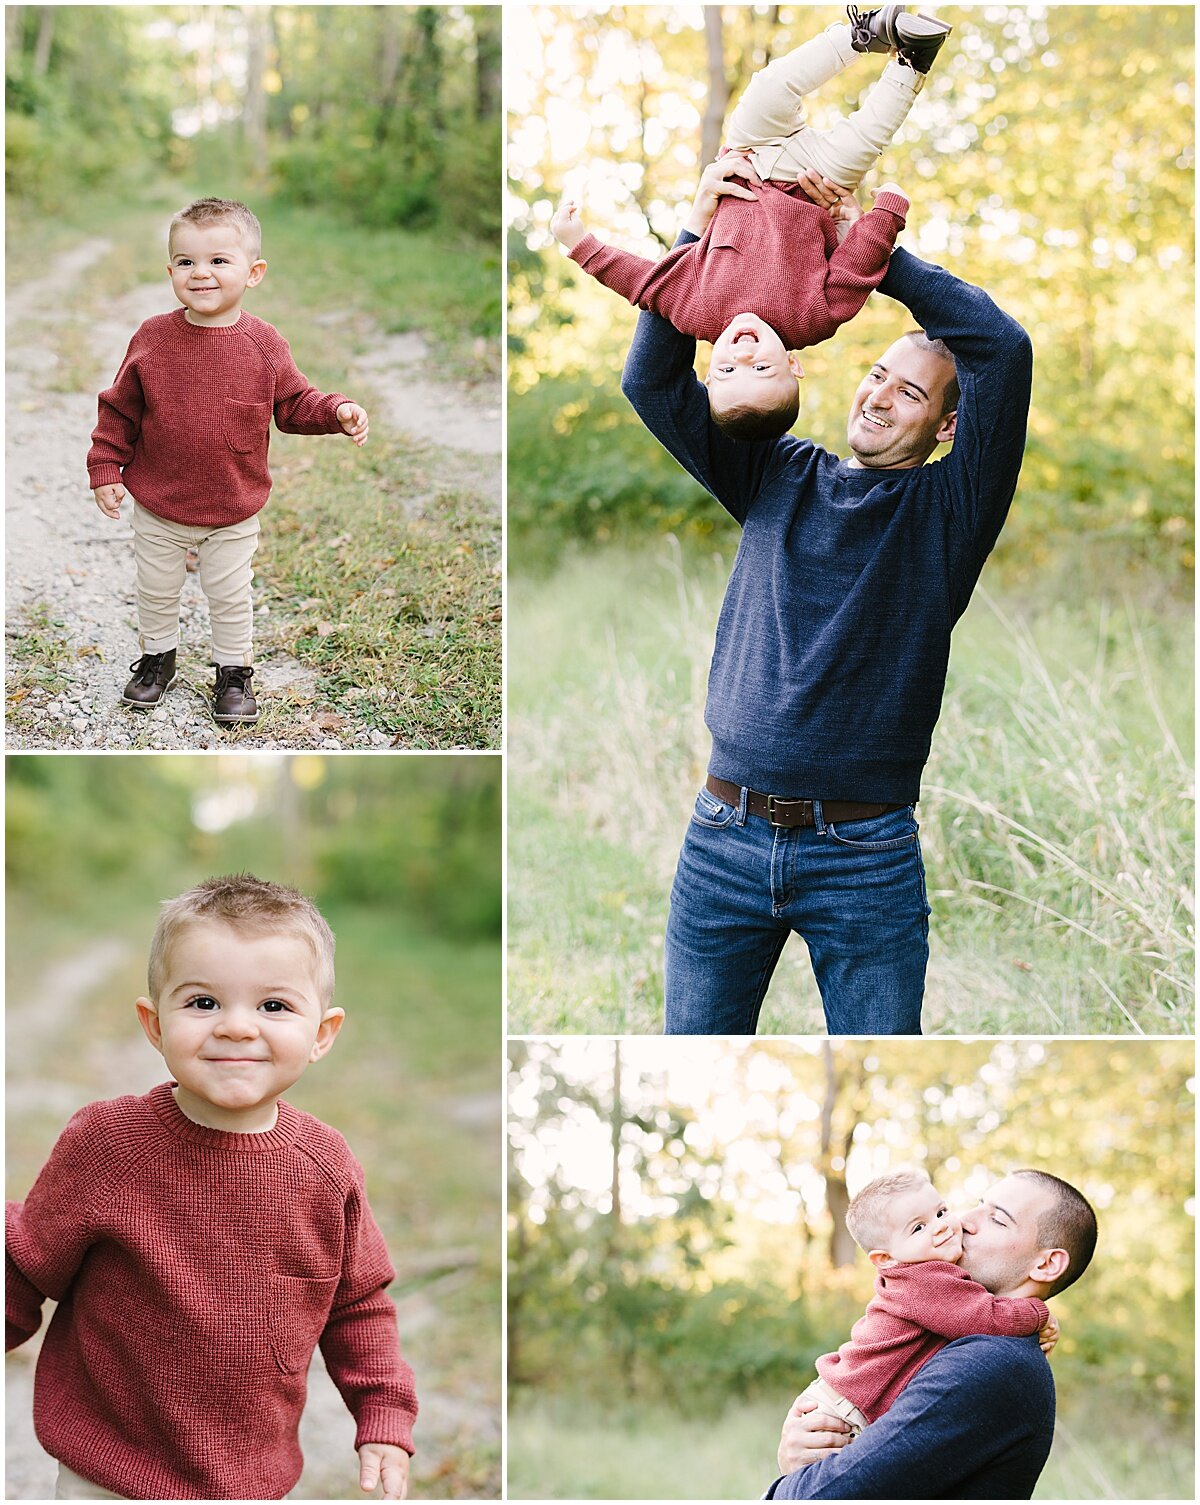  Father and son photos- baby boy and dad horseplaying  